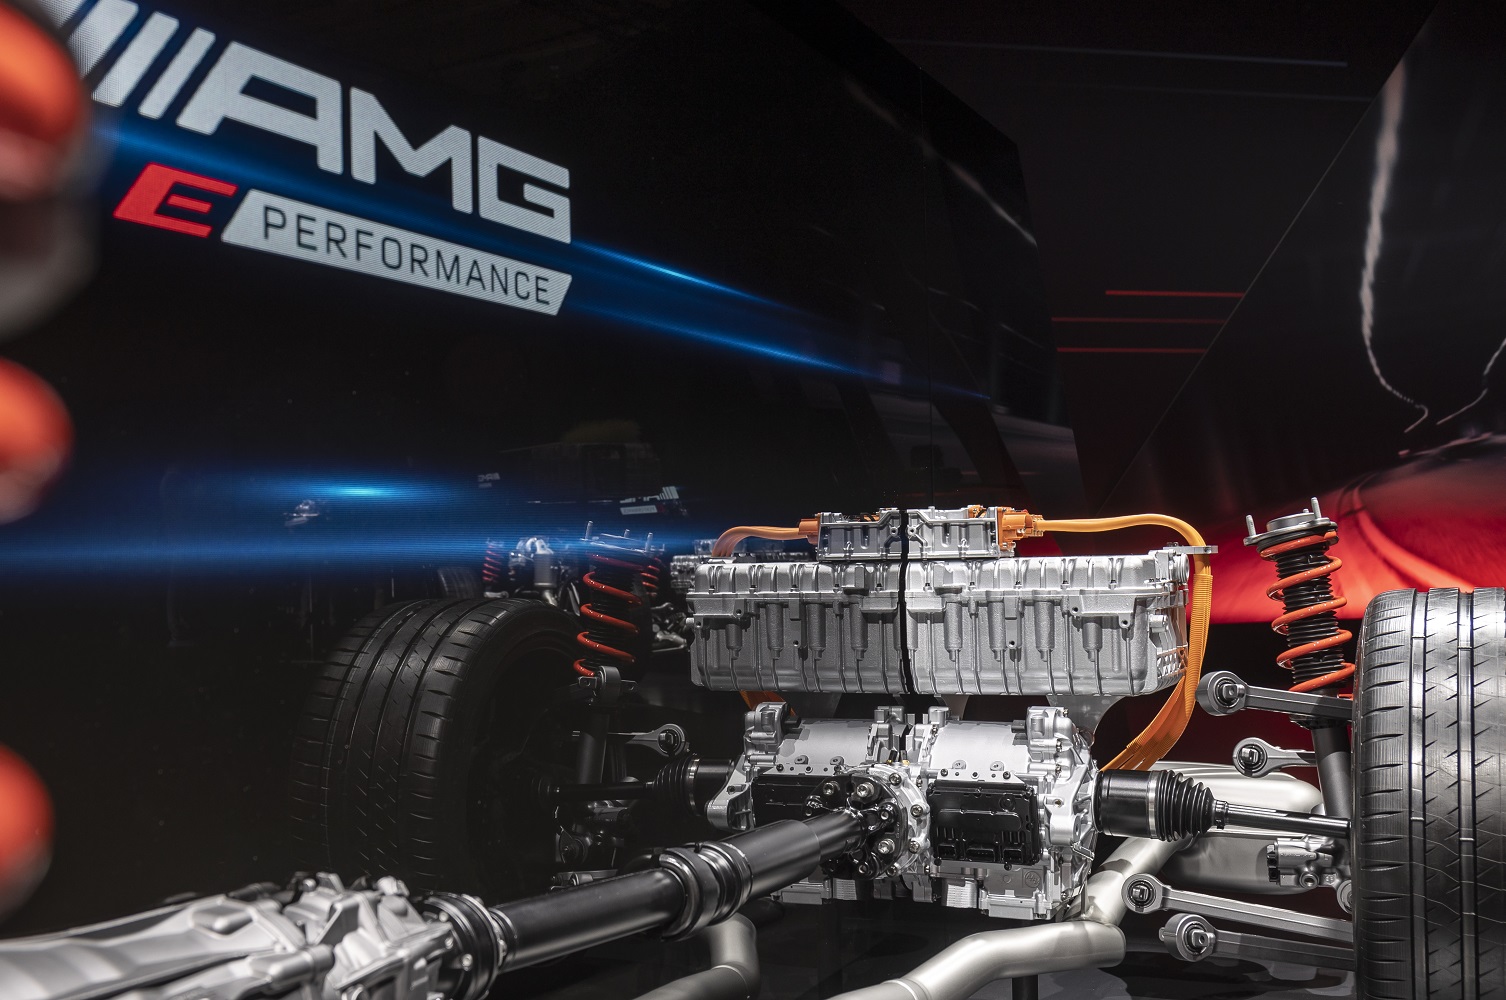 Mercedes-AMG's hybrid and electric drivetrains